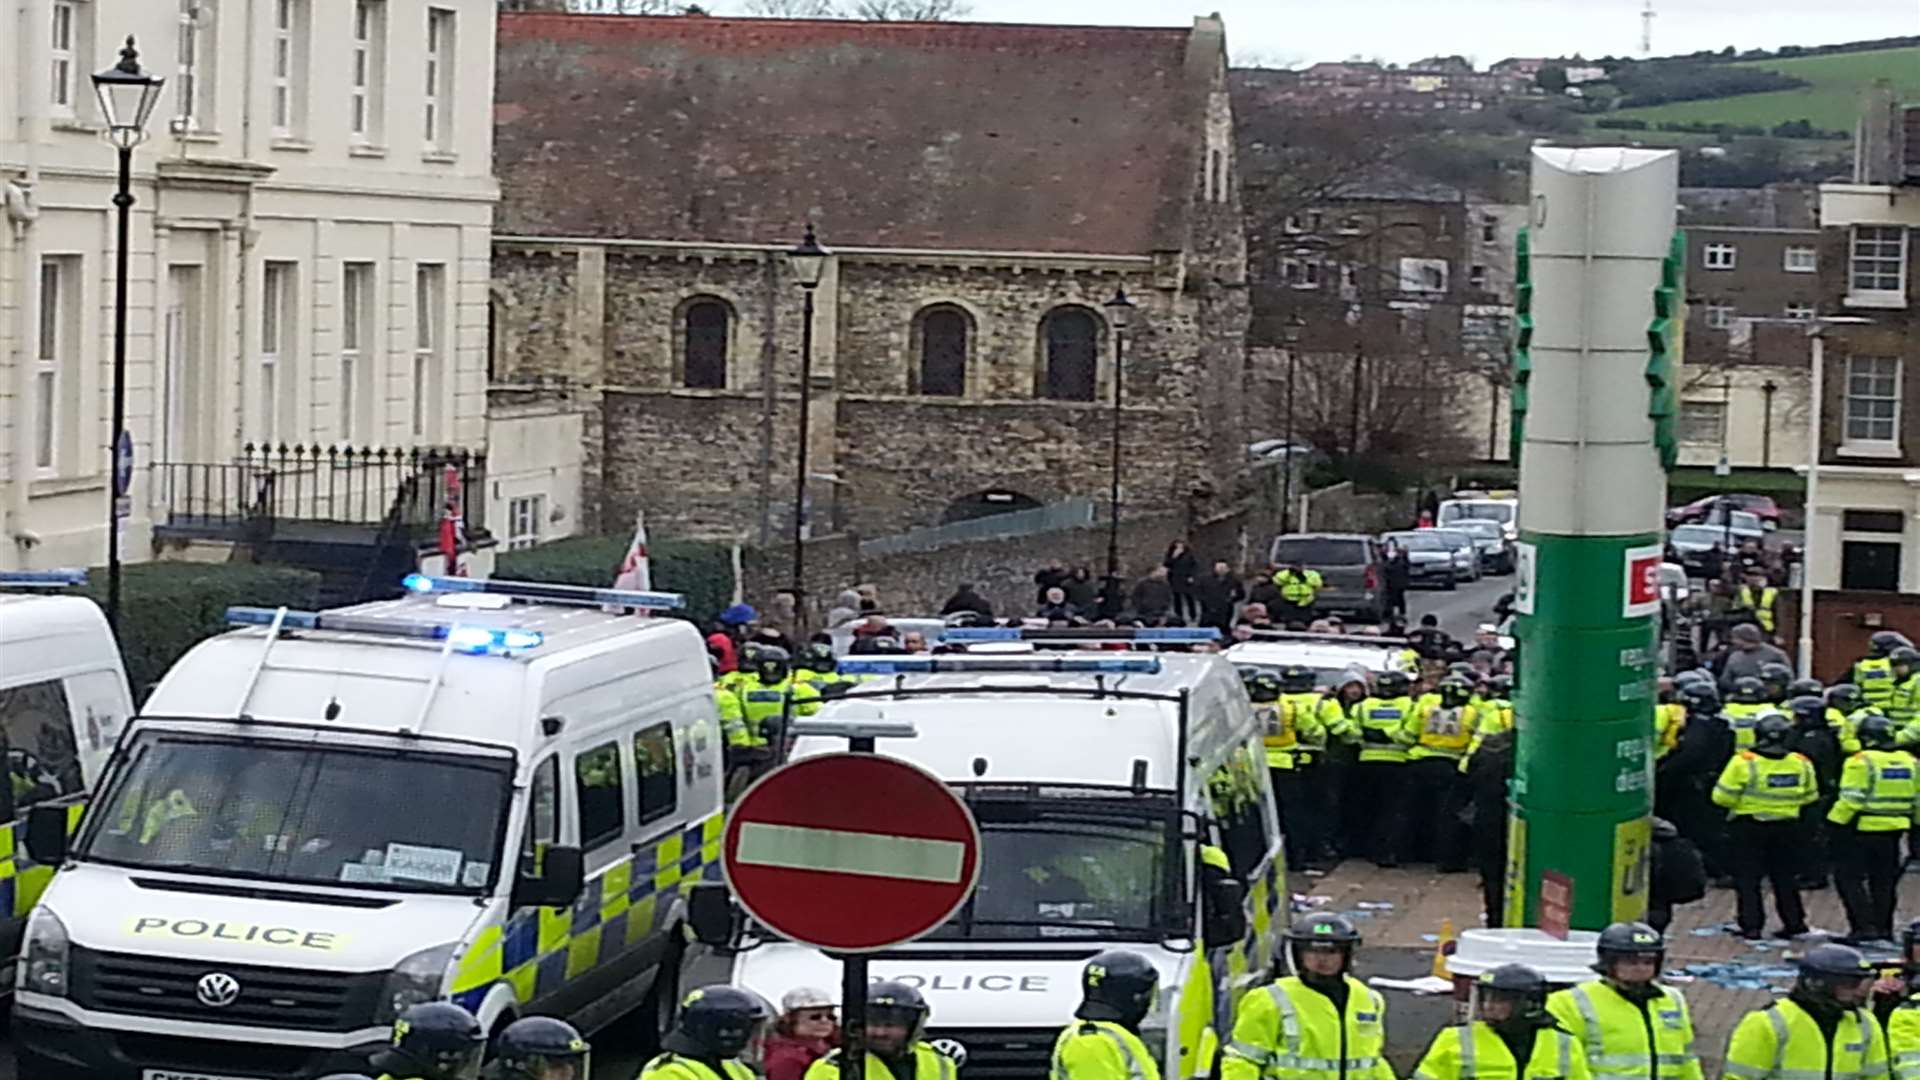 Police at the Dover protests that led to rioting on January 30.